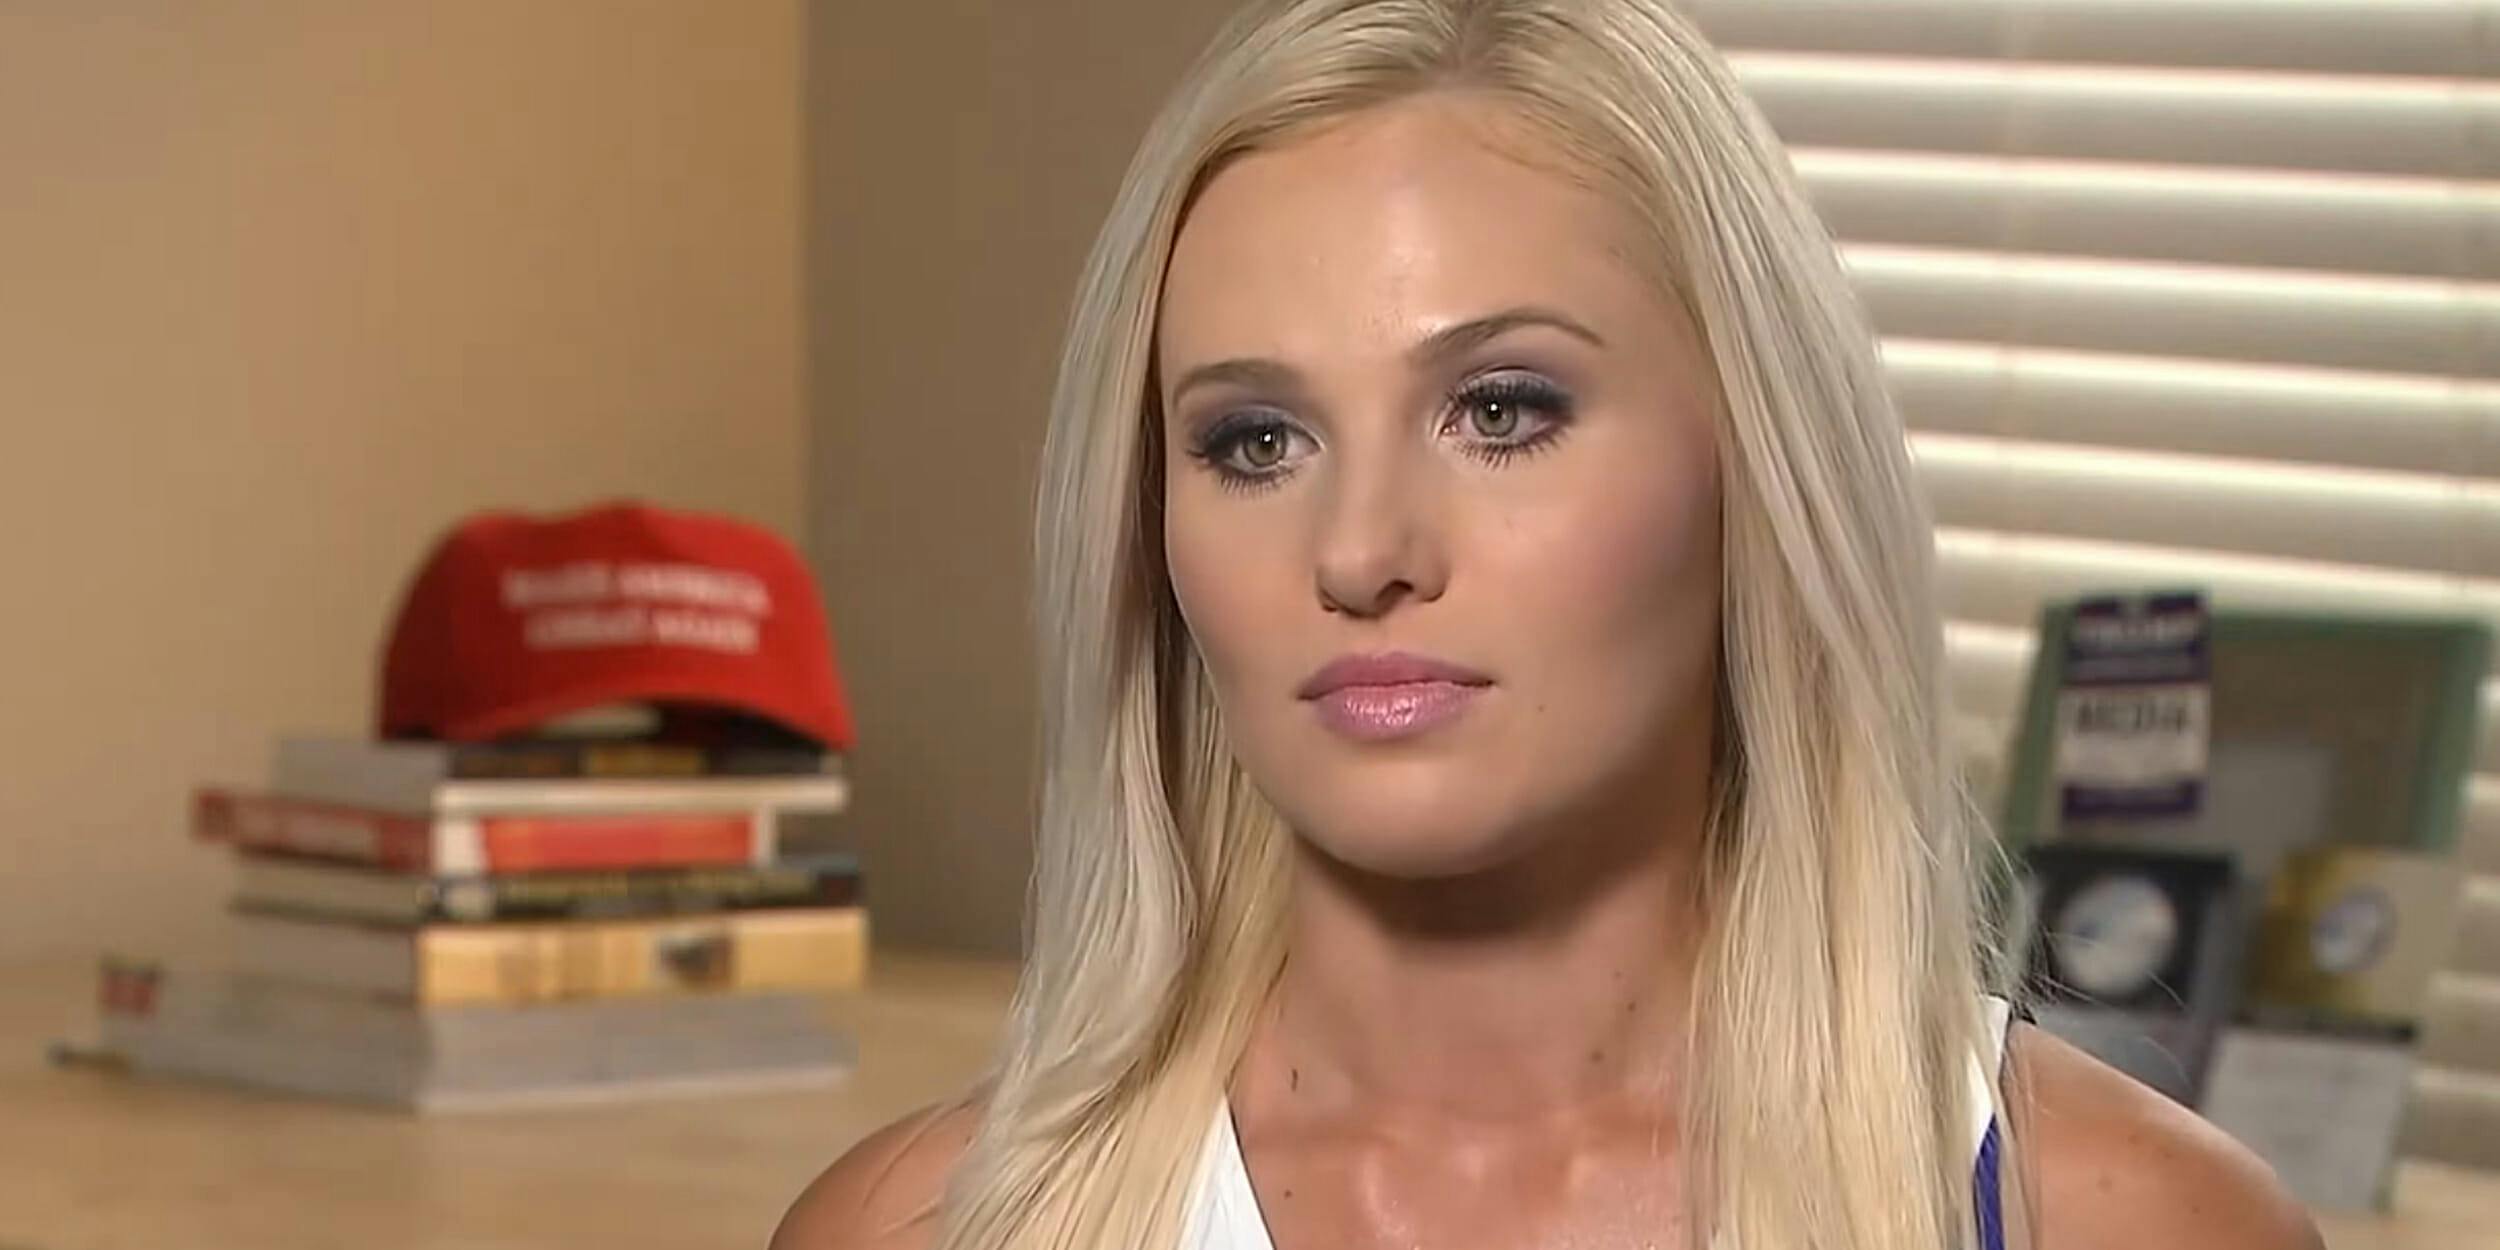 Tomi Lahren talks about losing her job at the Blaze